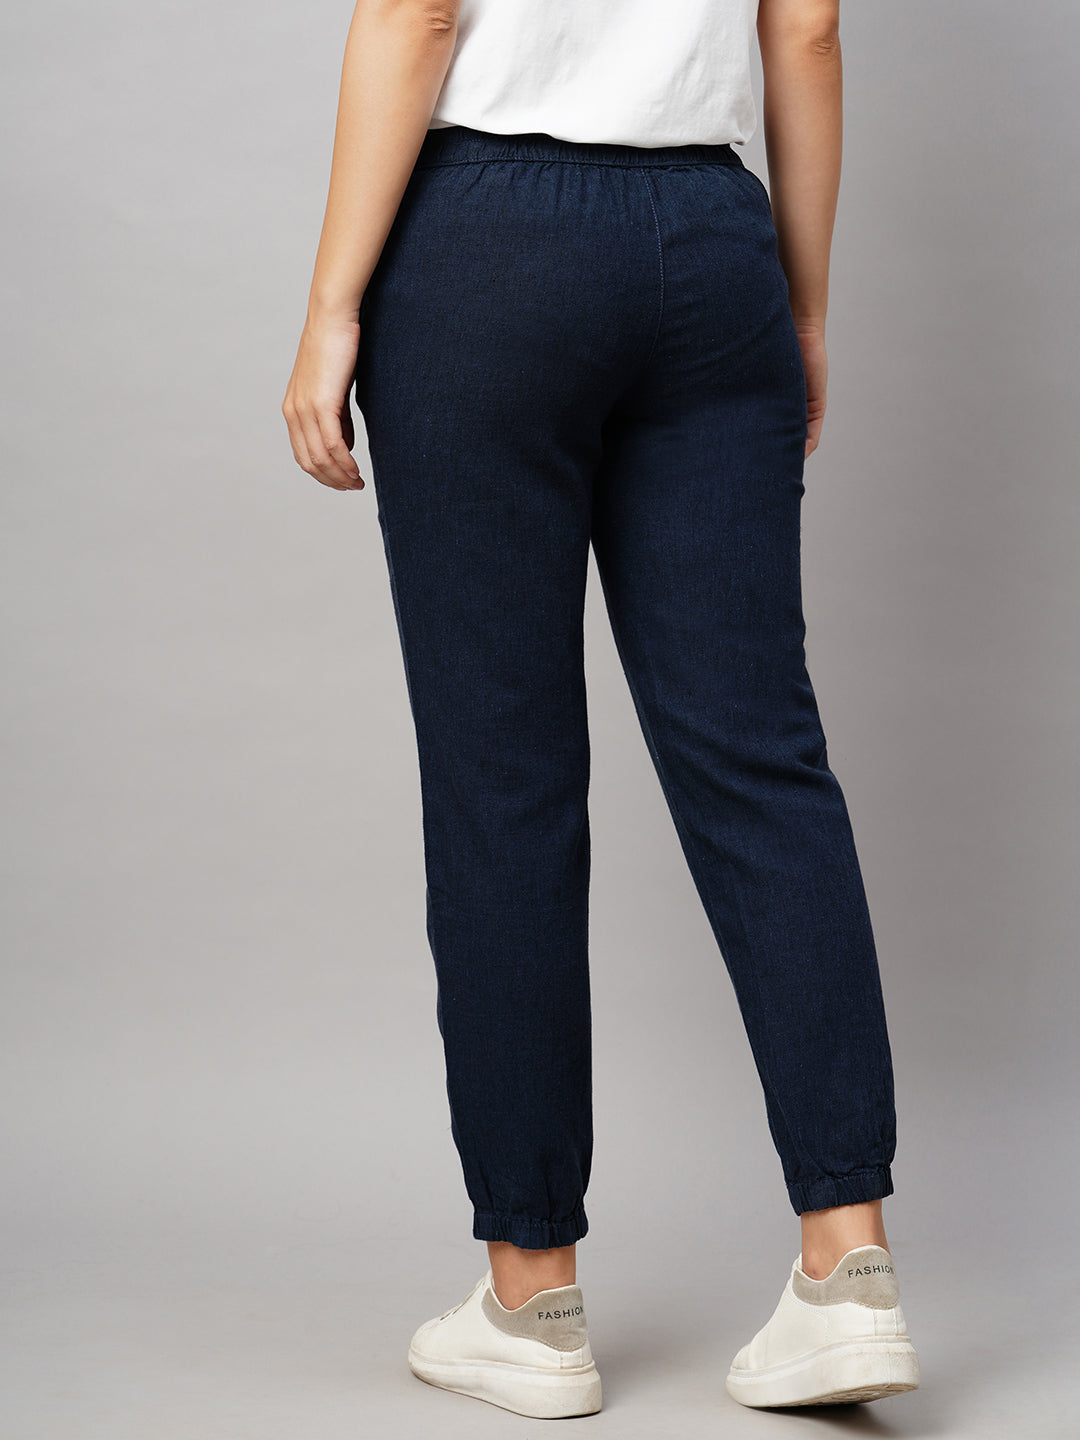 Cotton/Linen Stretchable Ladies Jogger Pant 7-8 clr, For Bottom Wear, Age:  14-35 at Rs 165/piece in Delhi